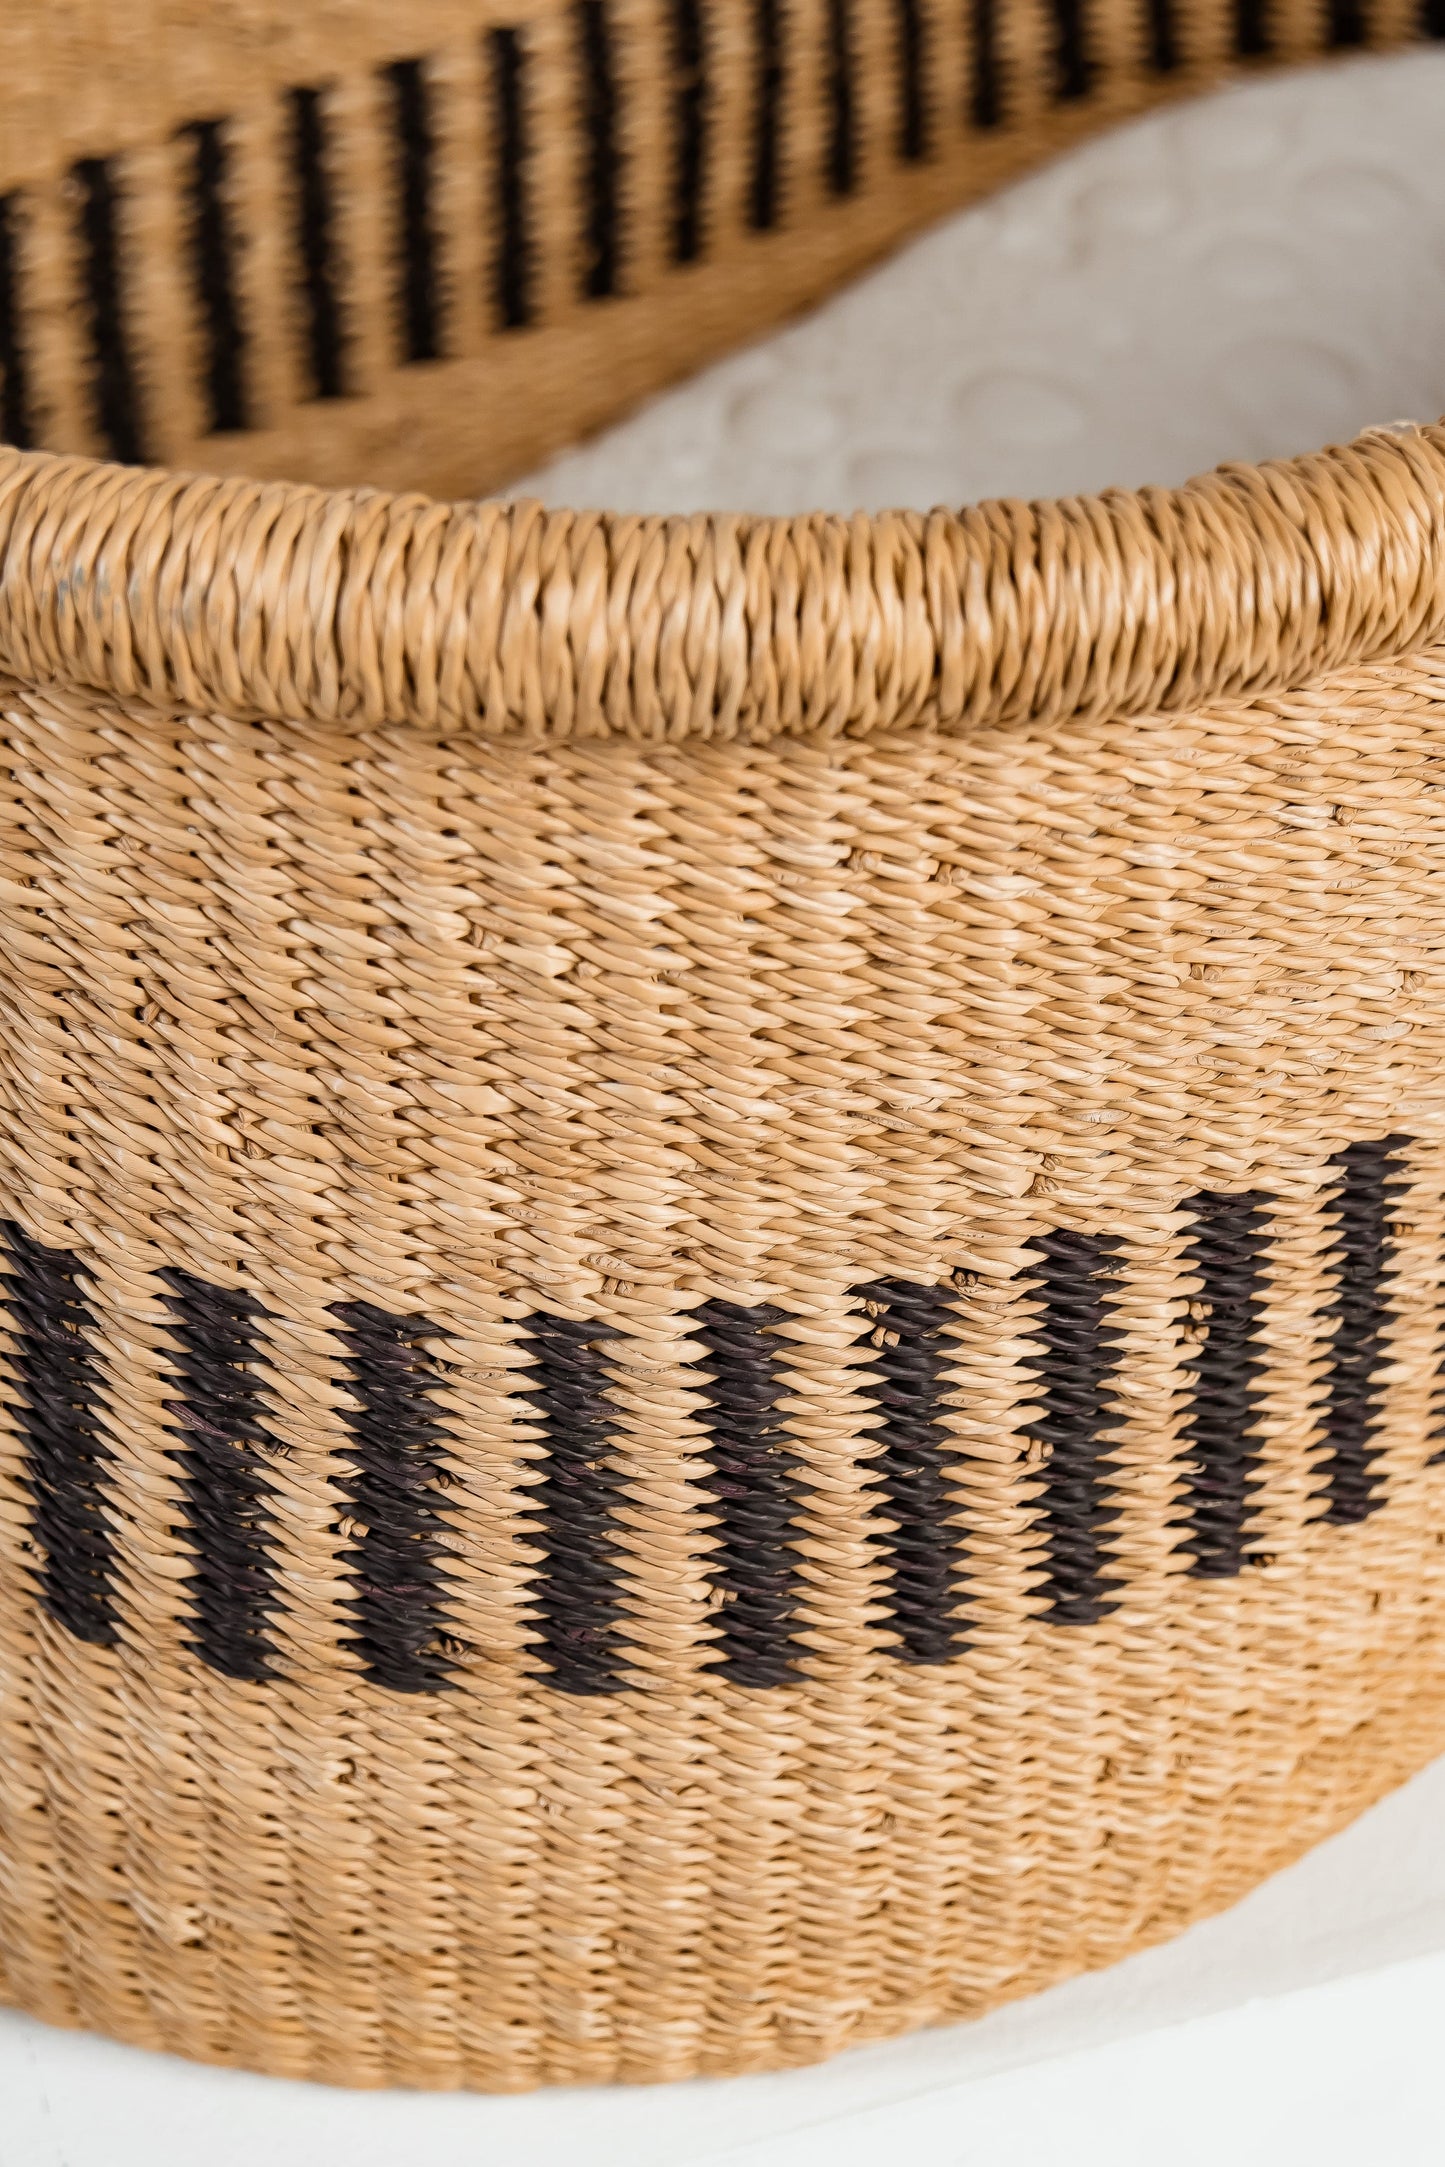 High African Basket Moses KidooCrafts with Mattress